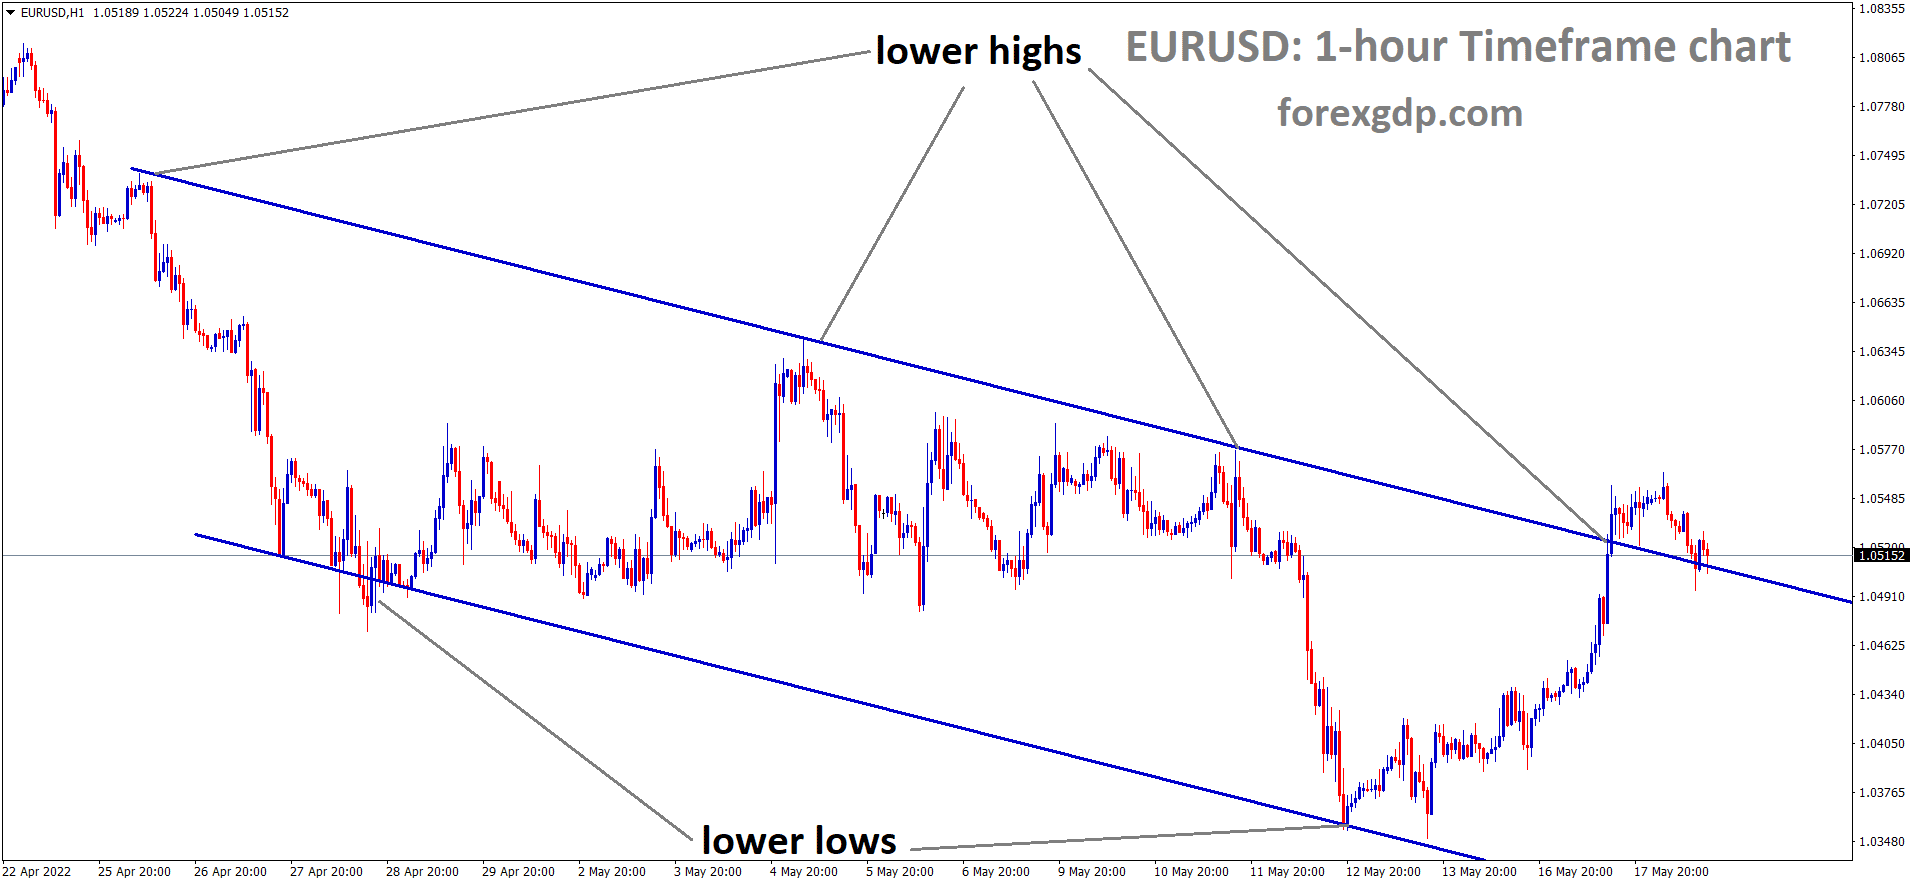 EURUSD is moving in a descending channel and the market has reached the lower high area of the channel.